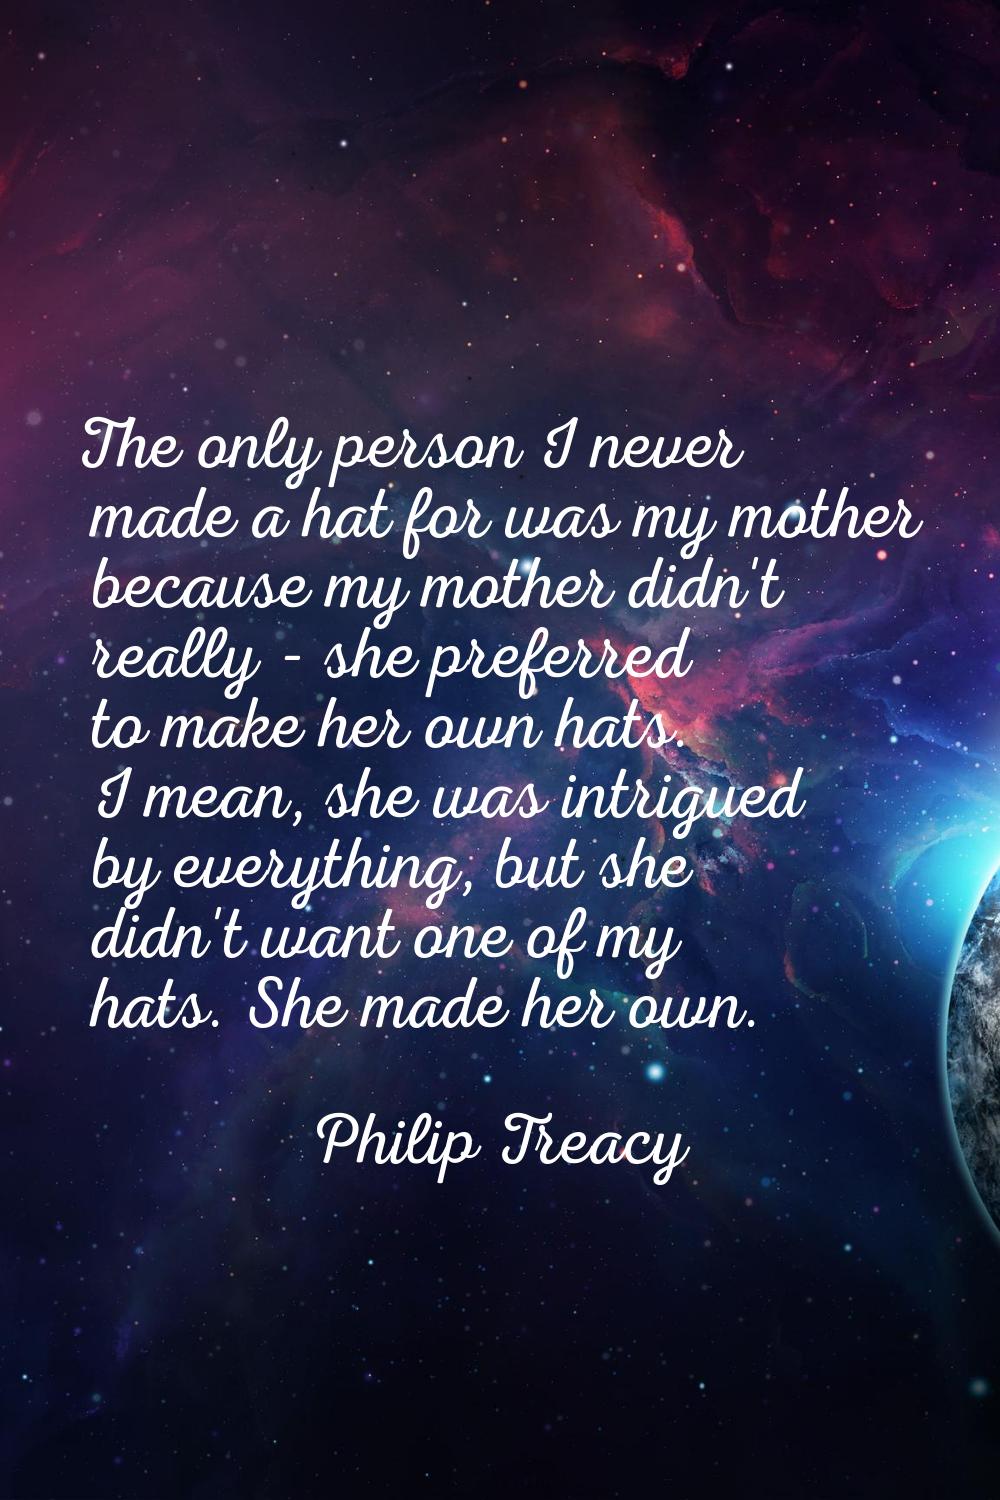 The only person I never made a hat for was my mother because my mother didn't really - she preferre